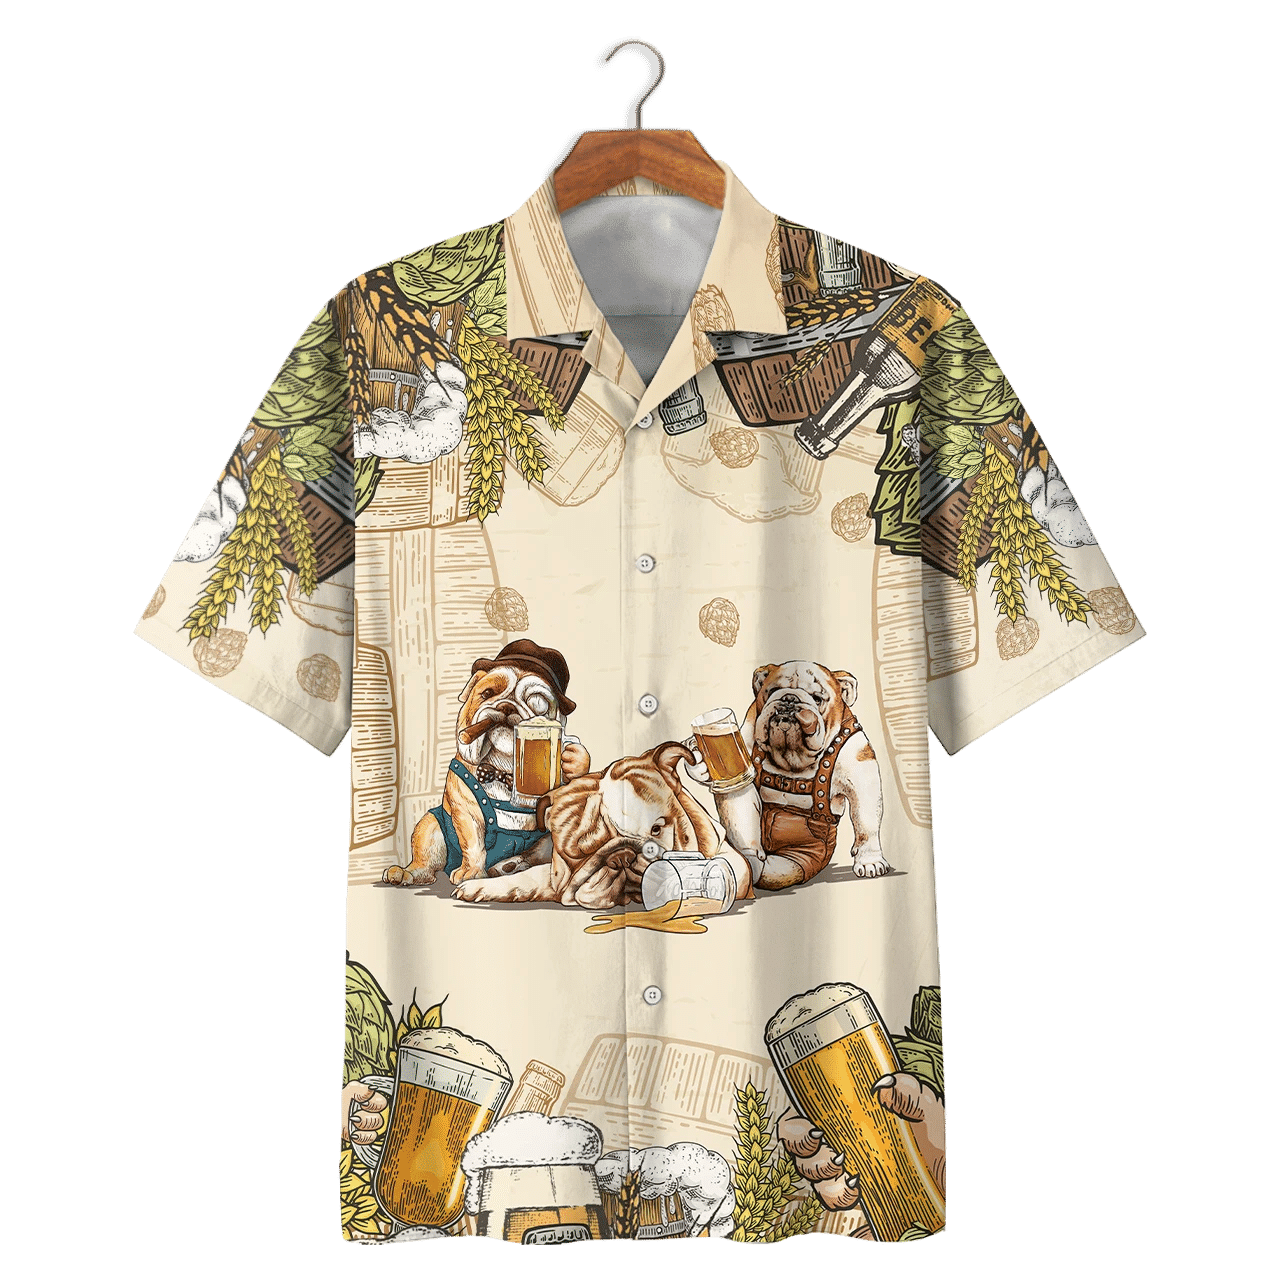 Discover many styles of Hawaiian shirts on the market in 2022 122